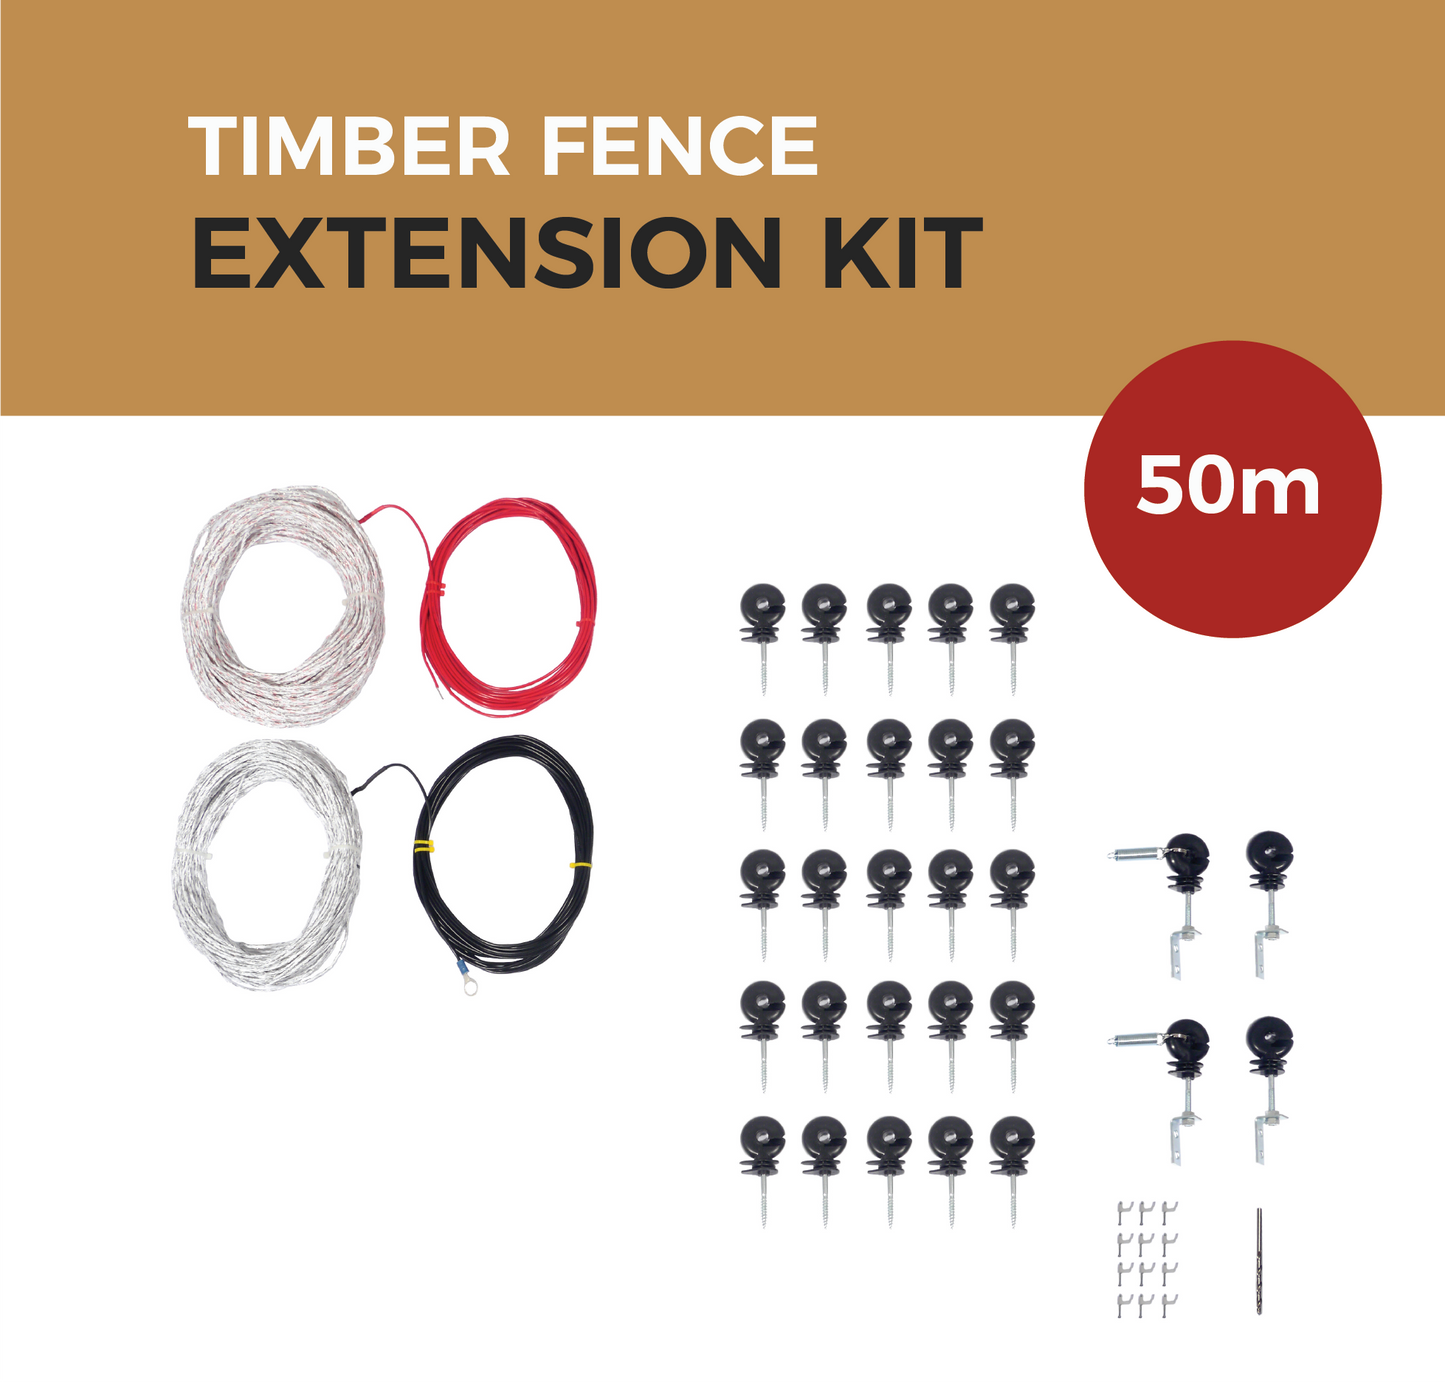 Cat Proof Fence 50m Extension Kit - Timber Fences | SmartCatsStayHome